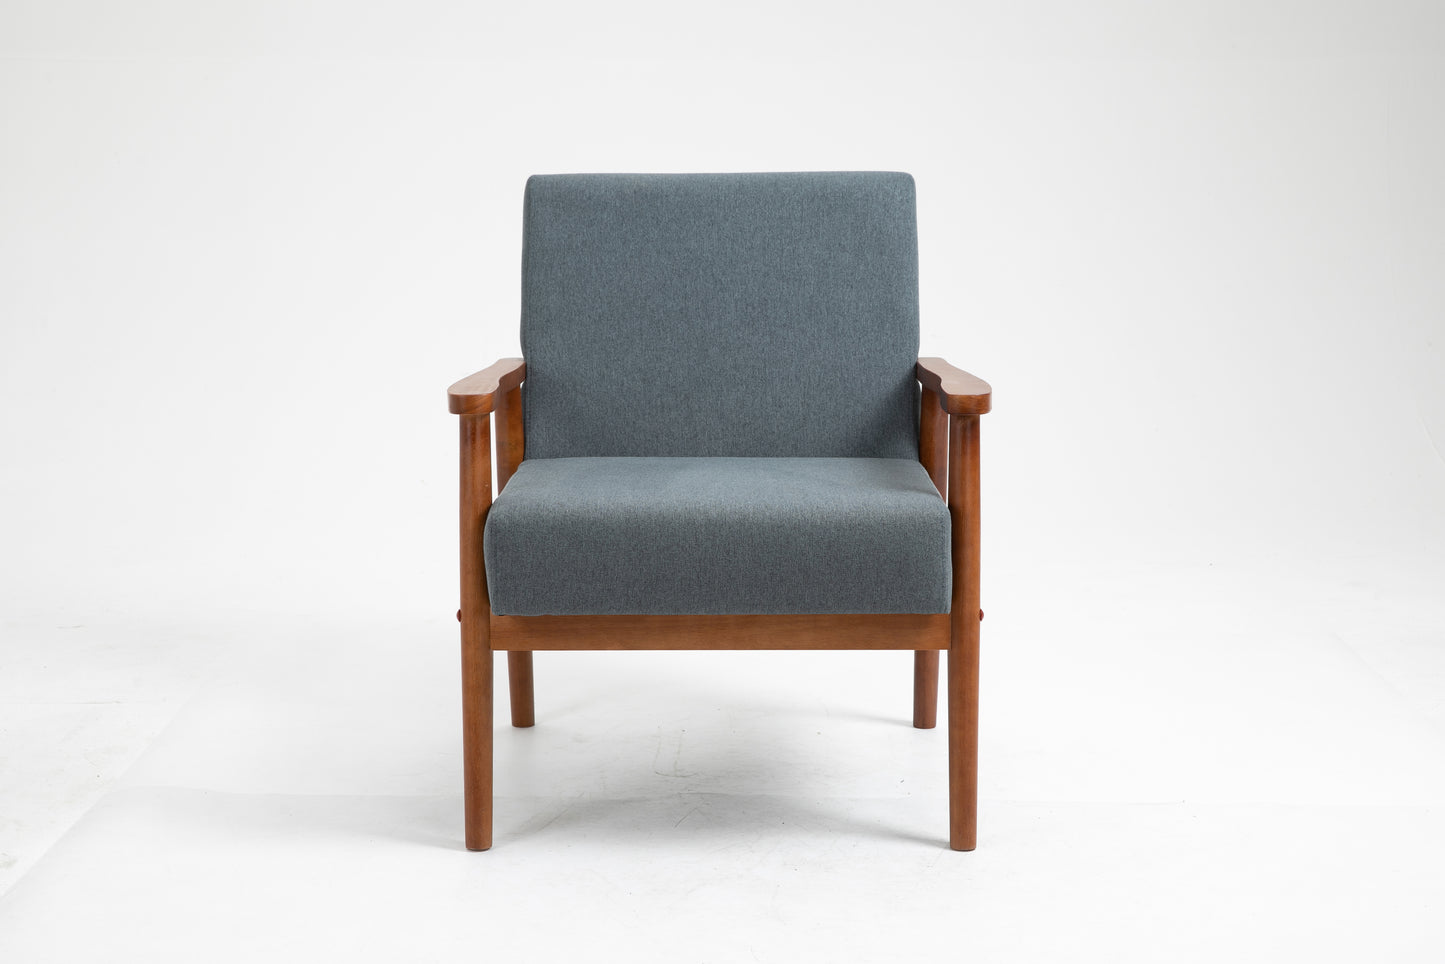 Solid wood upholstered armchair - Bluish gray